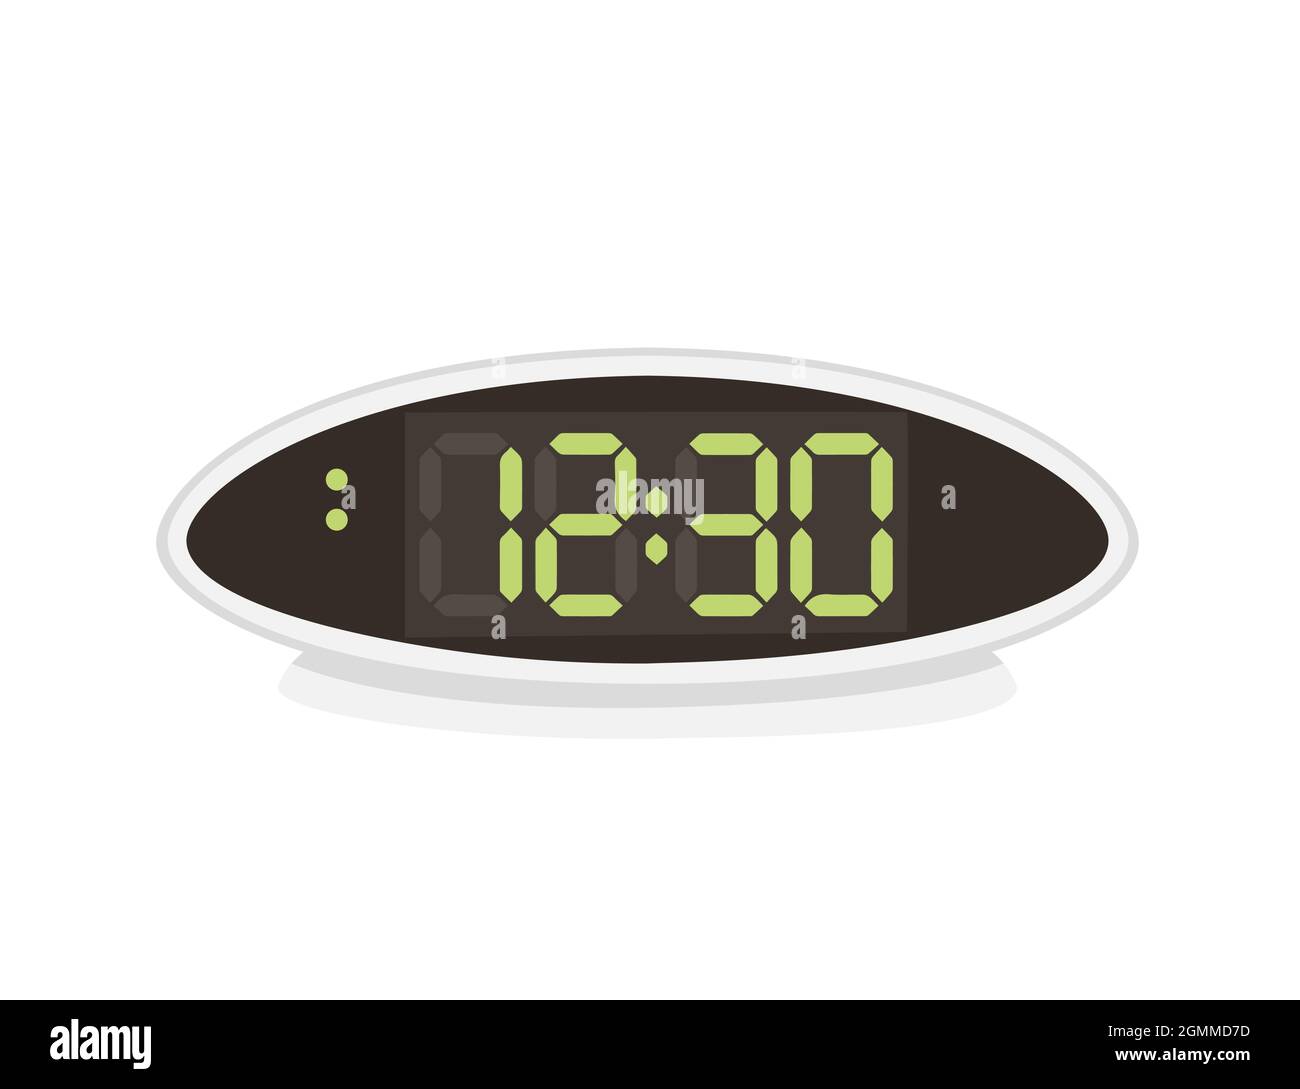 Modern alarm clock with digital display and green numbers vector illustration on white background Stock Vector